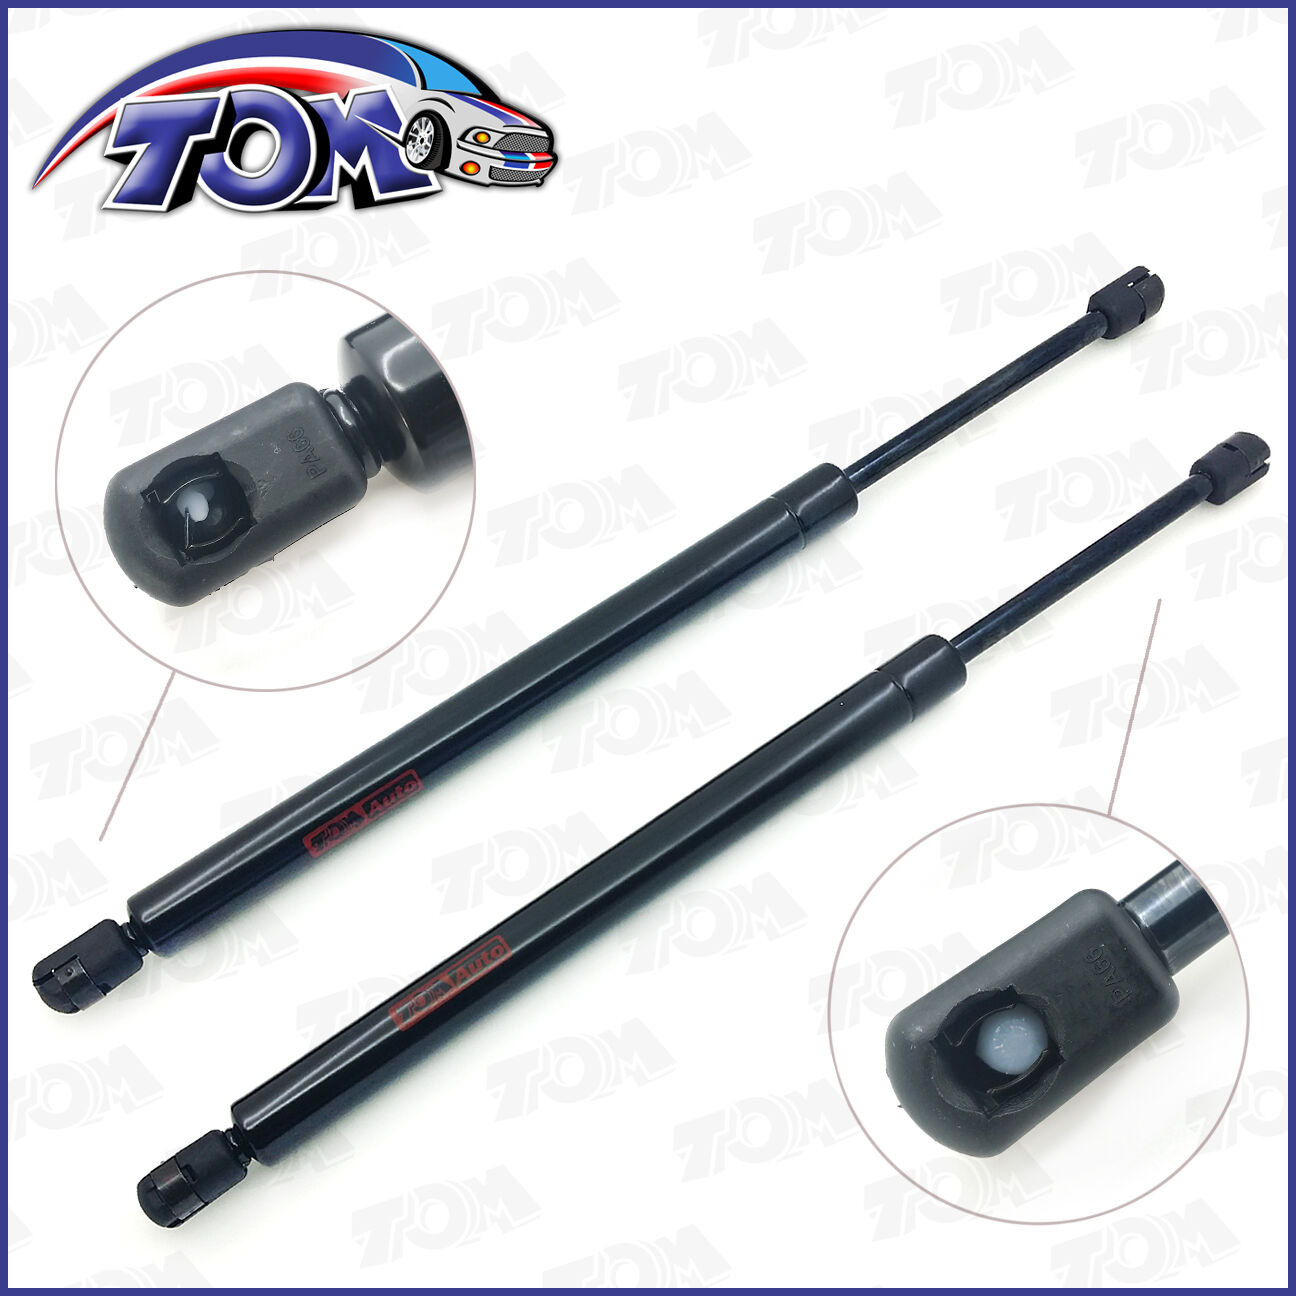 Brand New Set Of Rear Tailgate Hatch Lift Support Struts For 05-08 Dodge Magnum